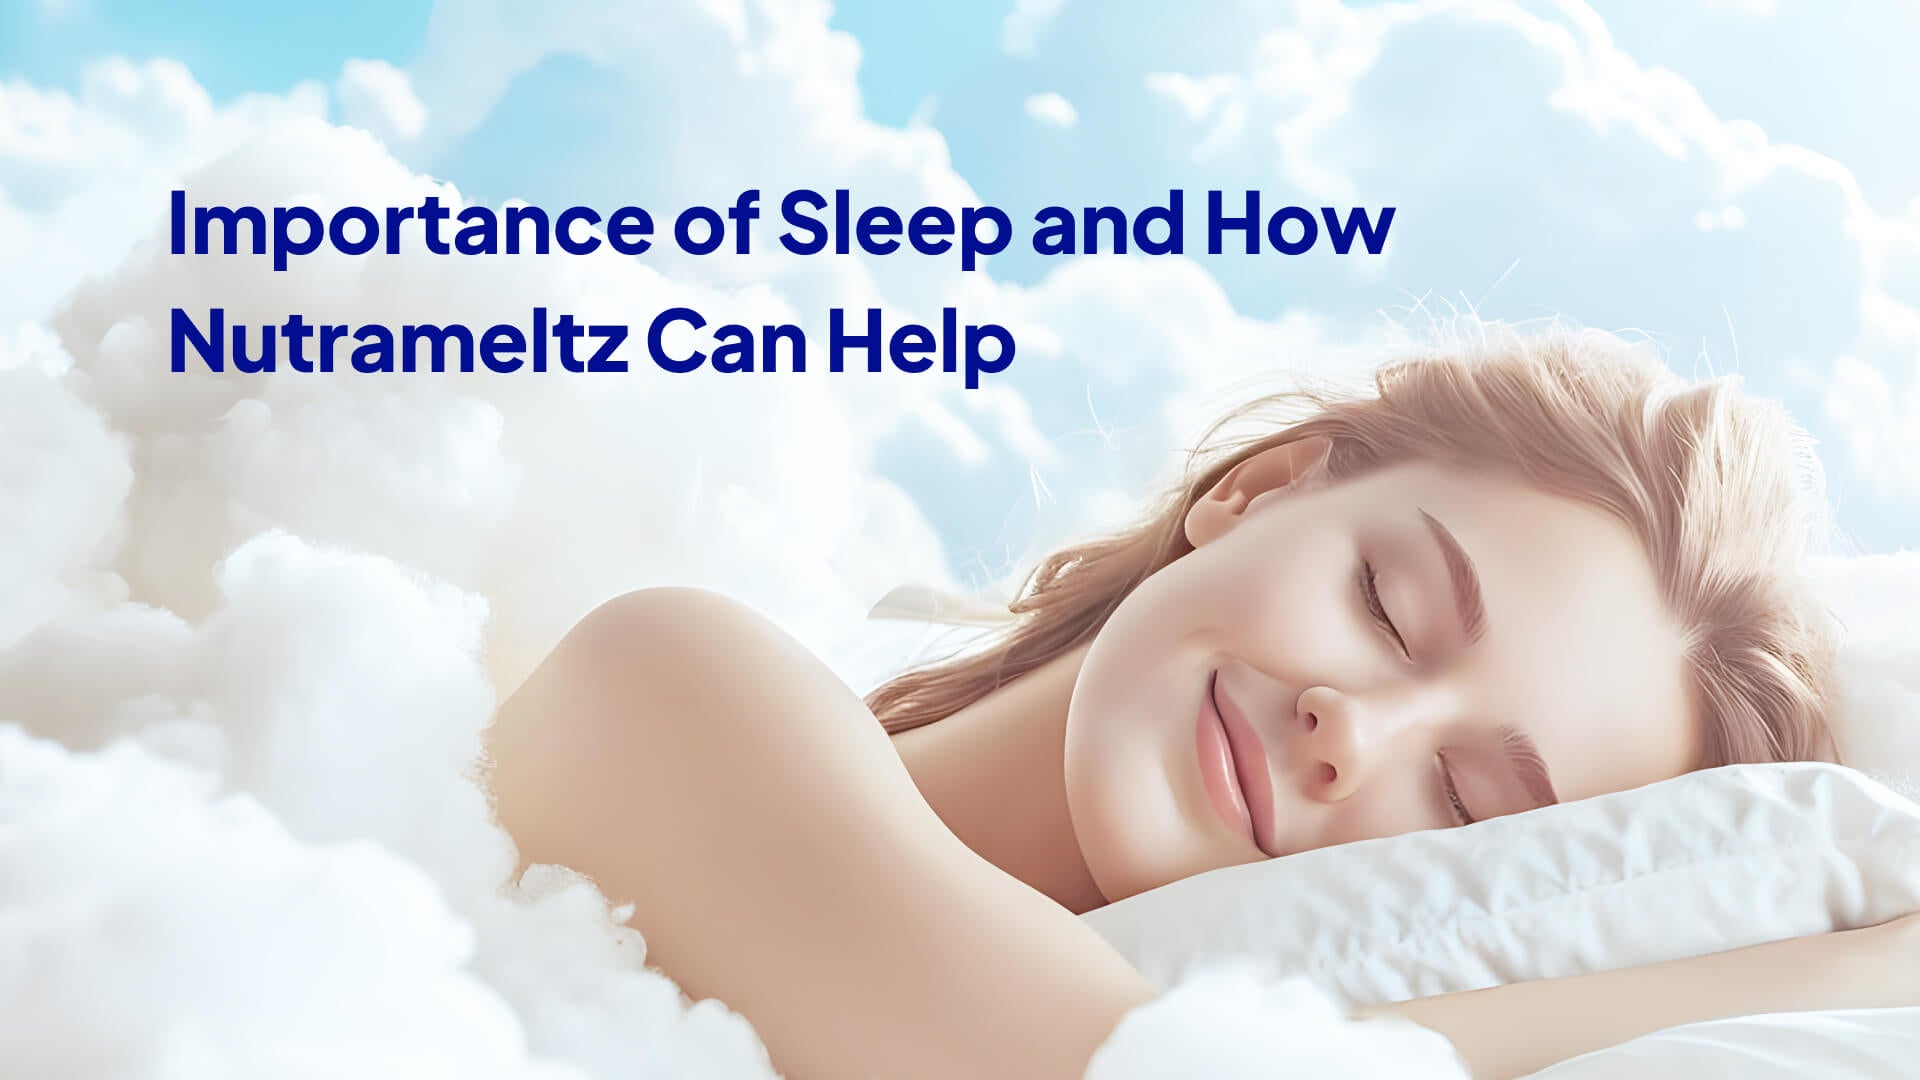 Importance of Sleep and How Nutrameltz Can Help